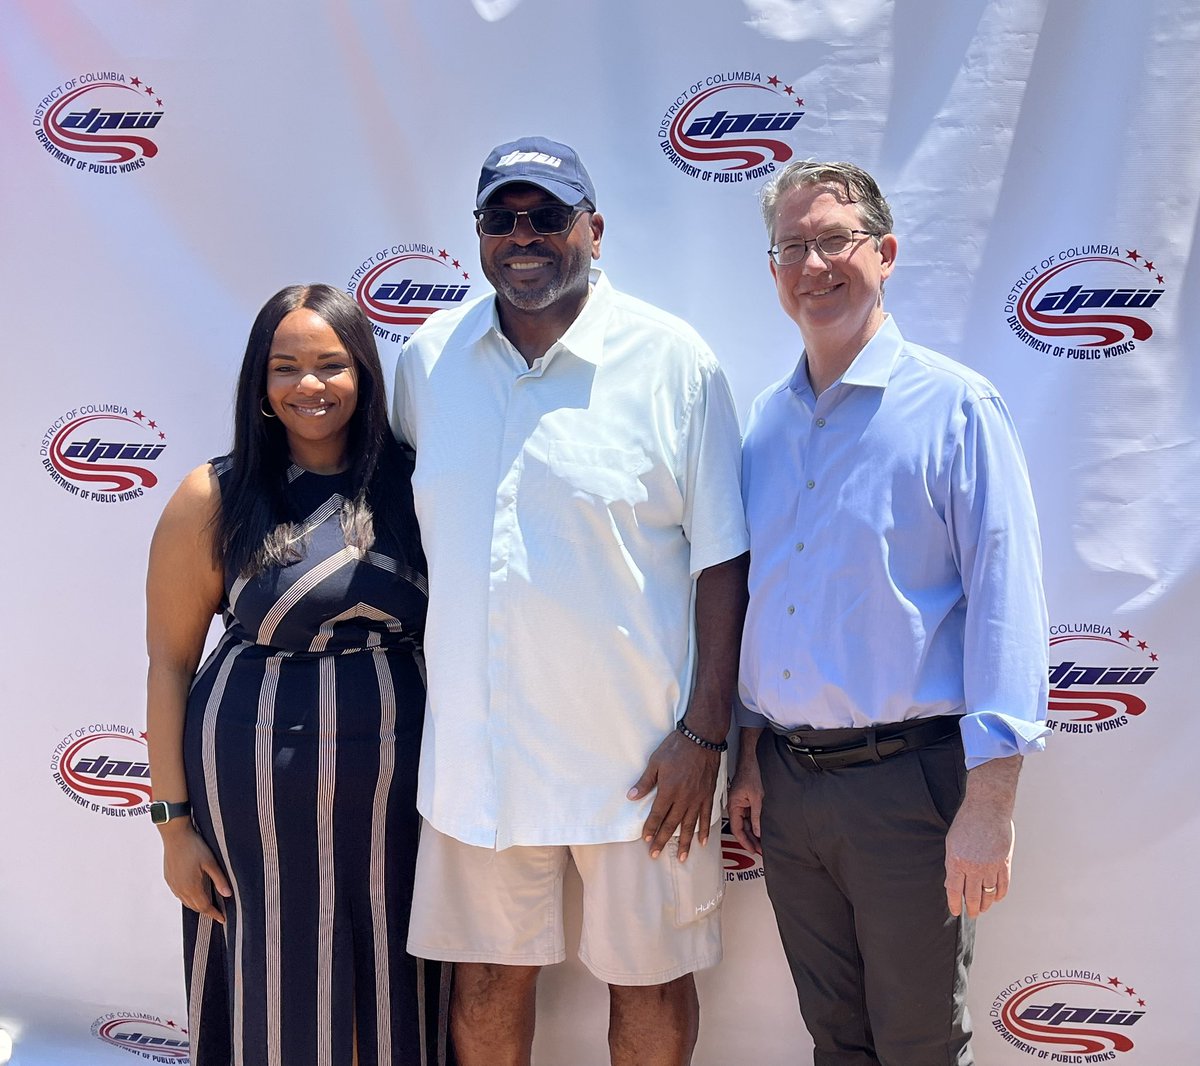 One of our strongest partners in the whole of government approach to reducing crime is @DCDPW - their workforce is vital in our task force efforts. Yesterday, Deputy Mayor Appiah joined their employee appreciation ceremony to recognize their unsung heroes. Thanks DPW! 🎉